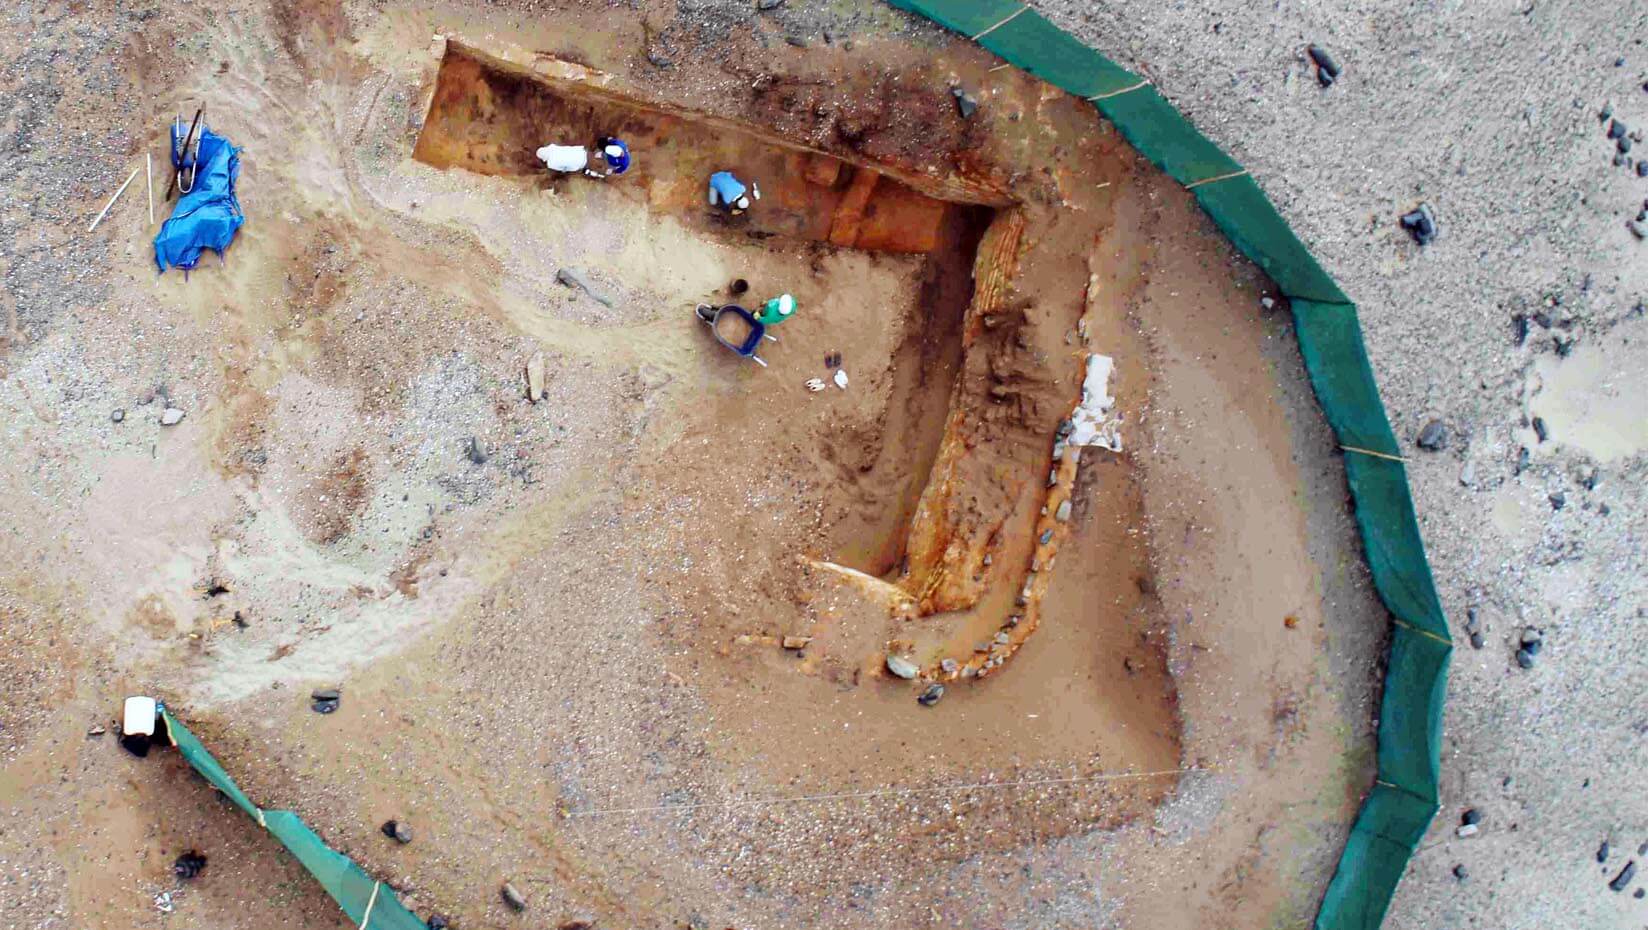 Drone view of early adobe architecture under excavation at Los Morteros, North Coast of Peru, dating over 5100 years ago.